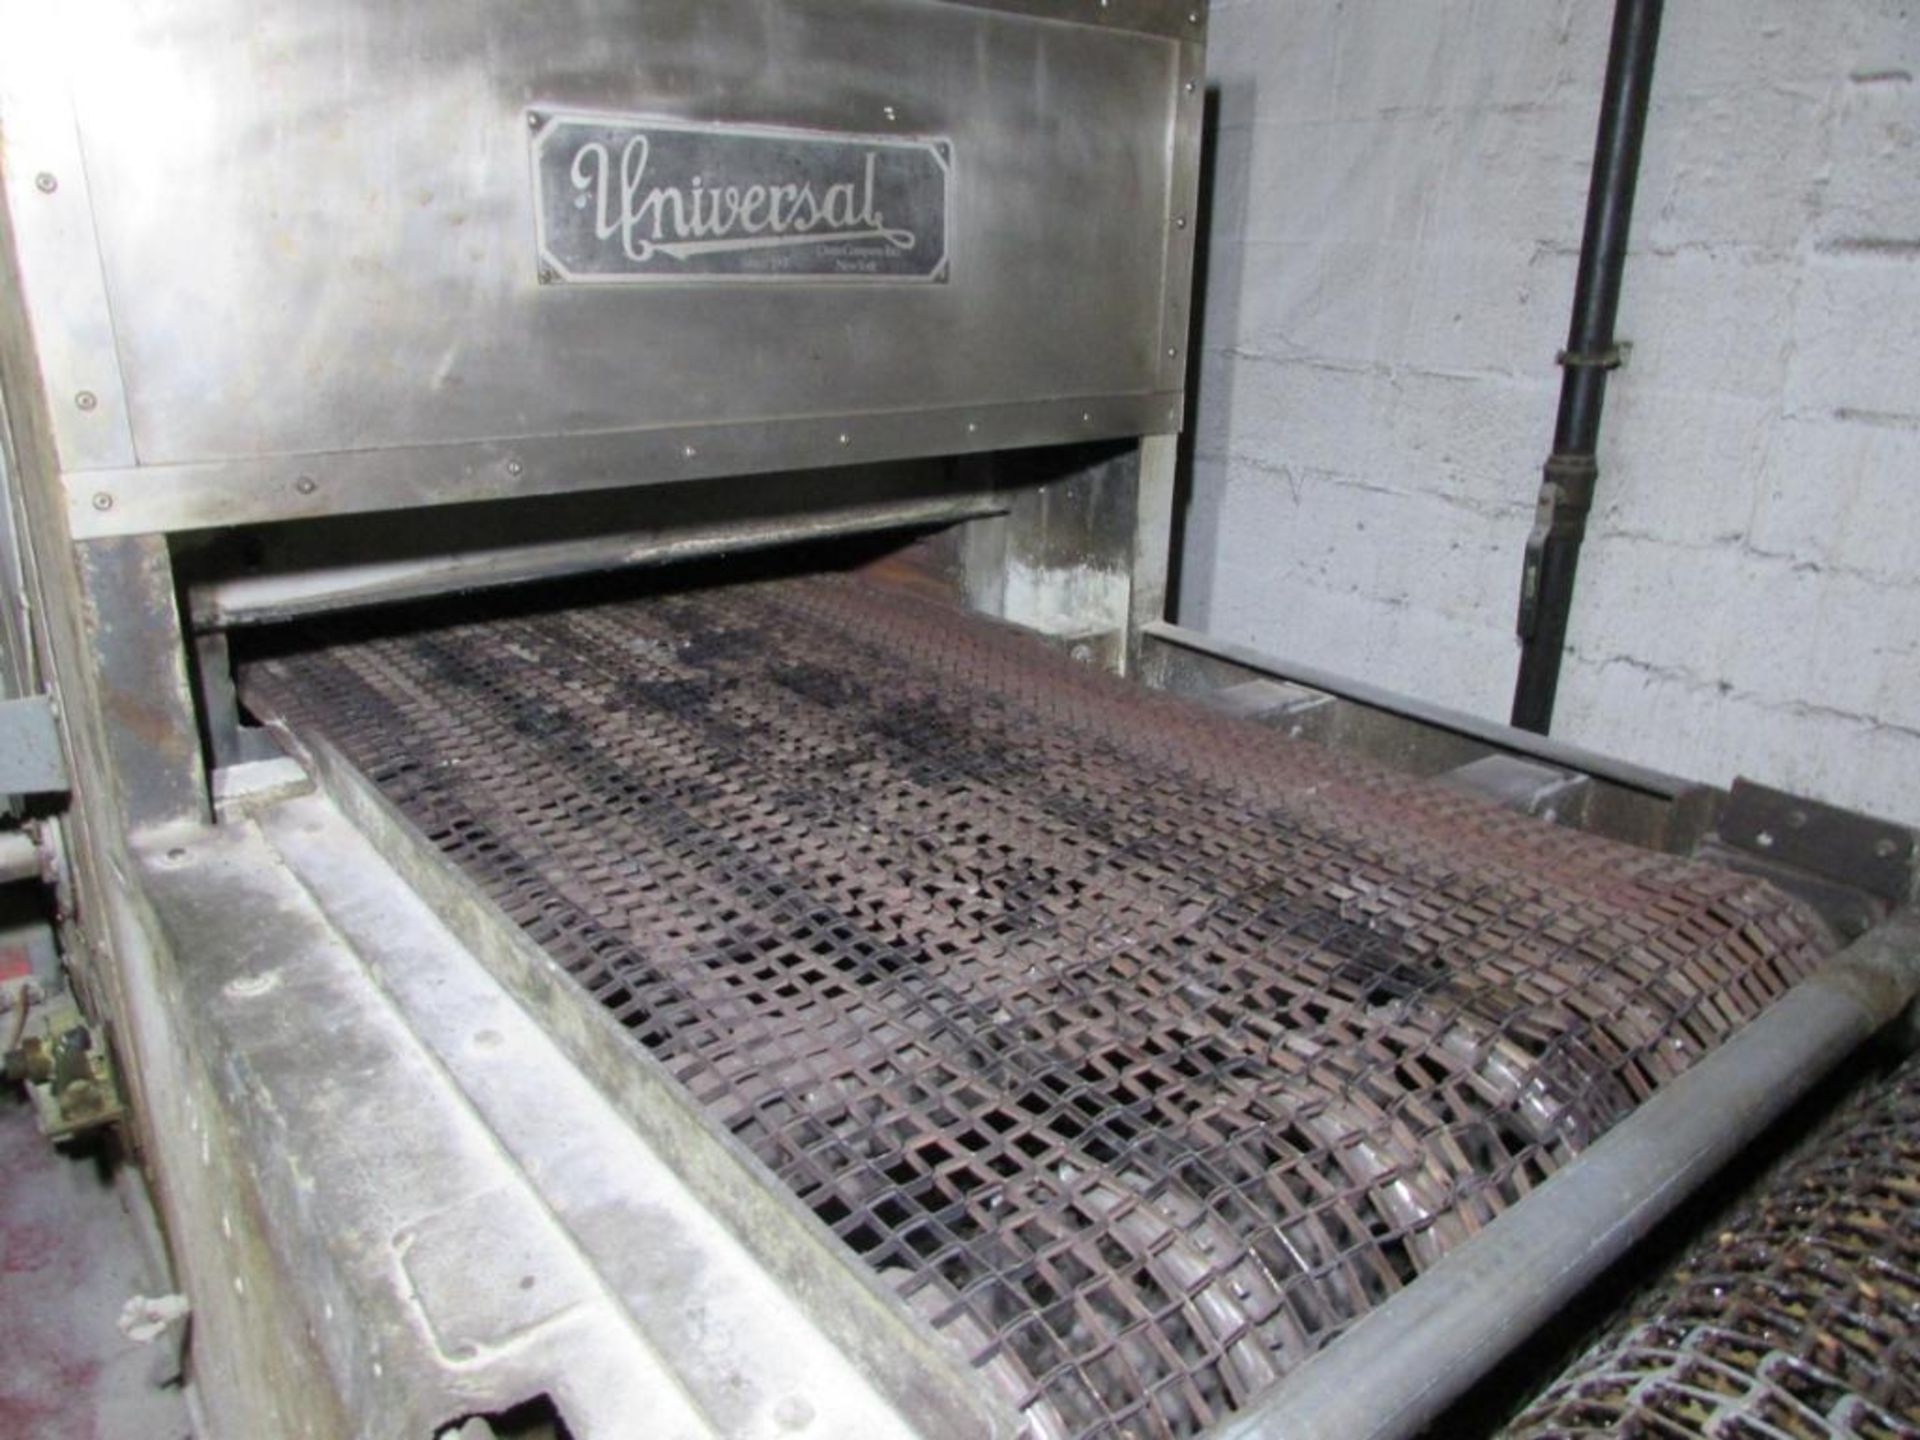 Universal 50'x3' Natural Gas Conveyor Tunnel Oven - Image 3 of 17